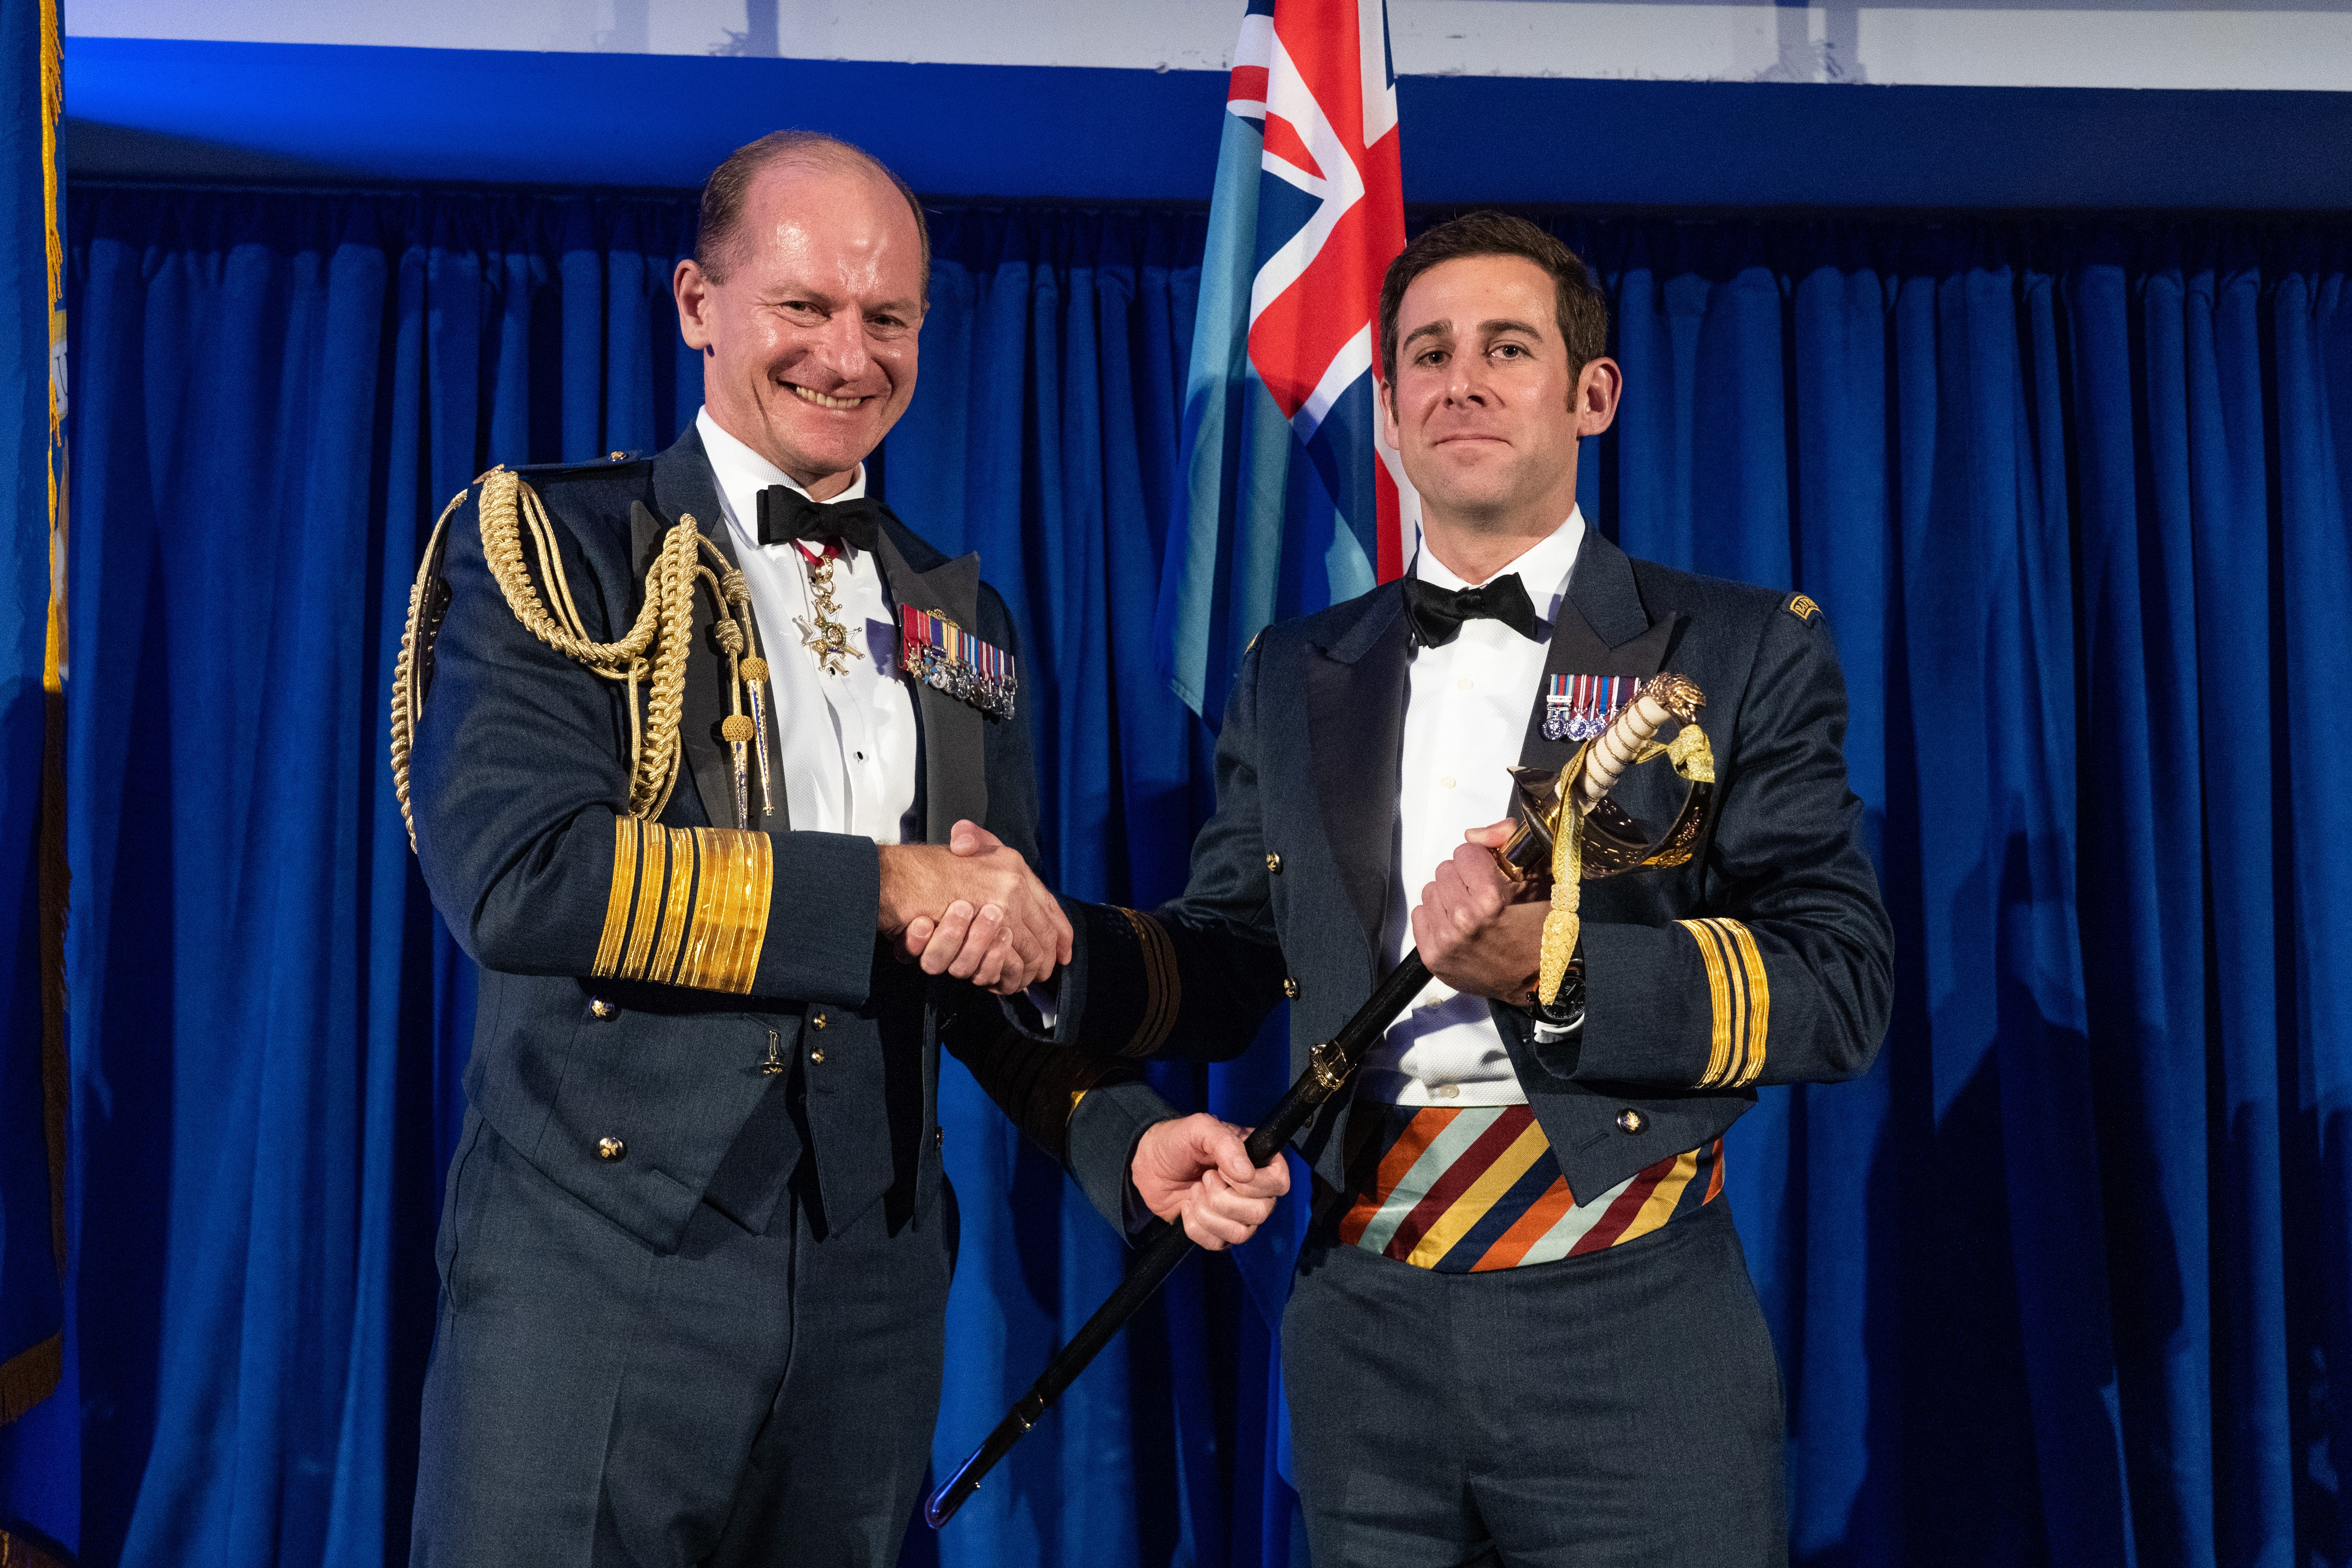 Image shows Air Chief Marshal Sir Mike Wigston shaking hands with Christopher as he awards him the sword.